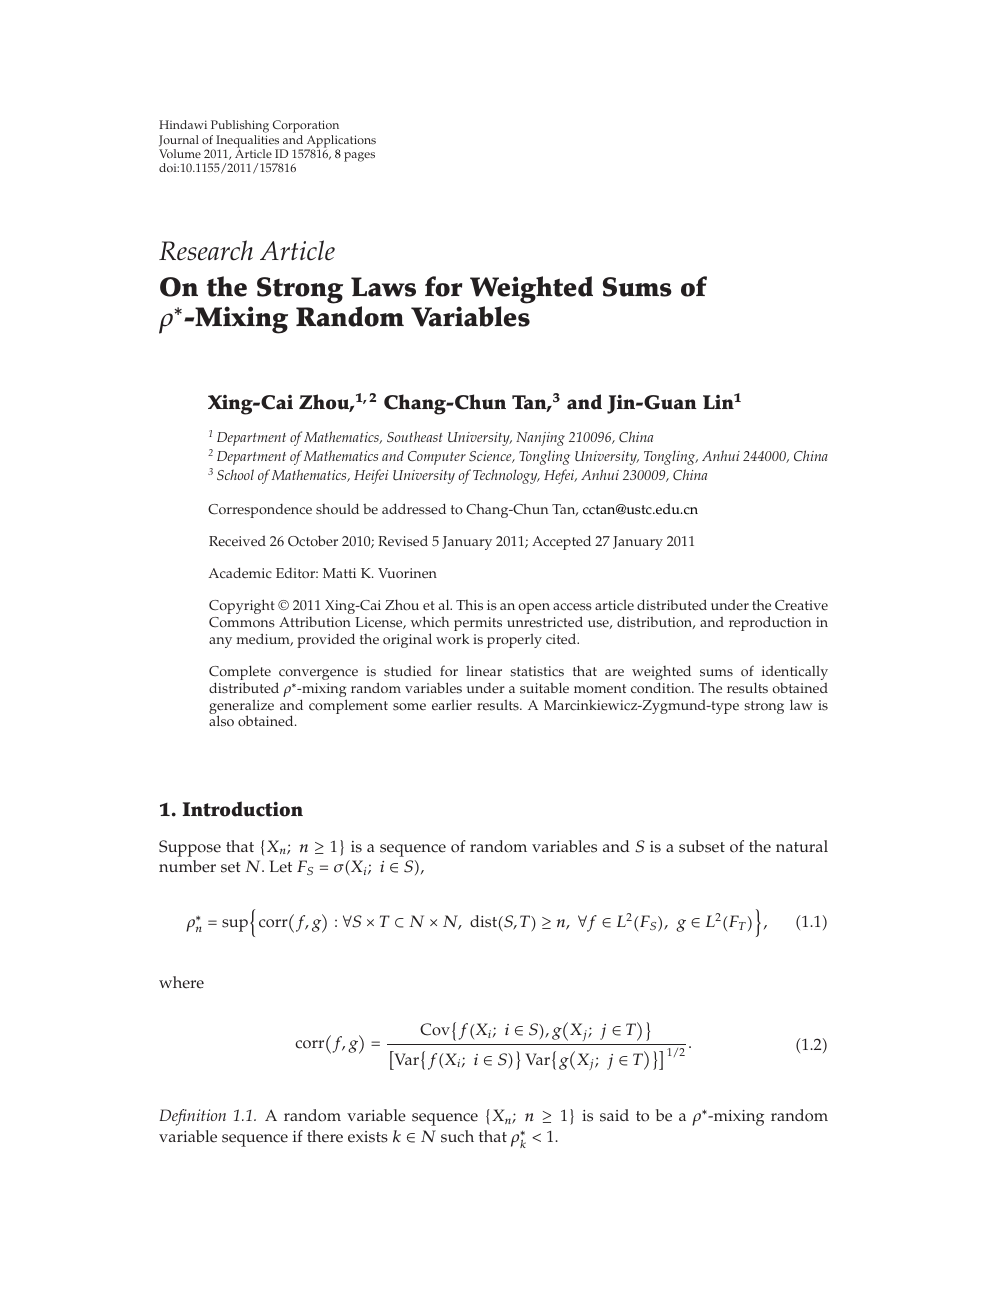 On The Strong Laws For Weighted Sums Of Mixing Random Variables Topic Of Research Paper In Mathematics Download Scholarly Article Pdf And Read For Free On Cyberleninka Open Science Hub